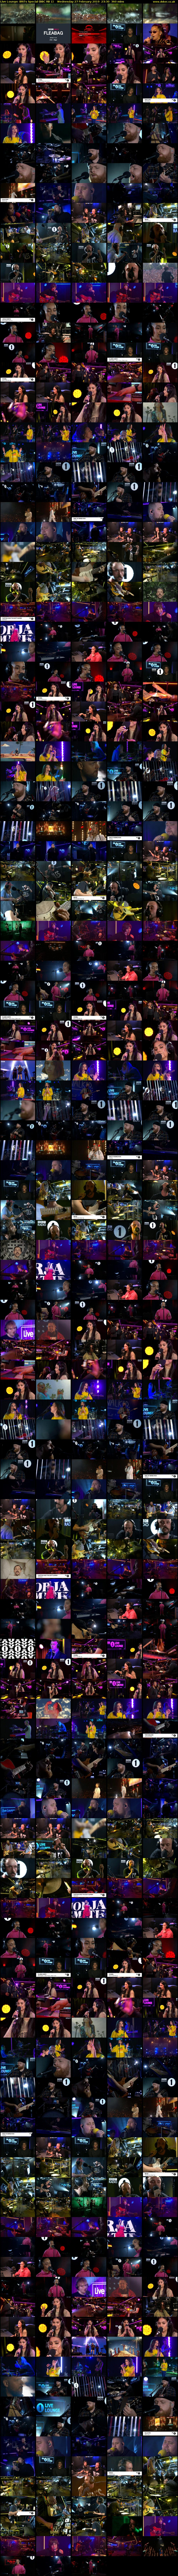 Live Lounge: BRITs Special (BBC RB 1) Wednesday 27 February 2019 23:30 - 05:30